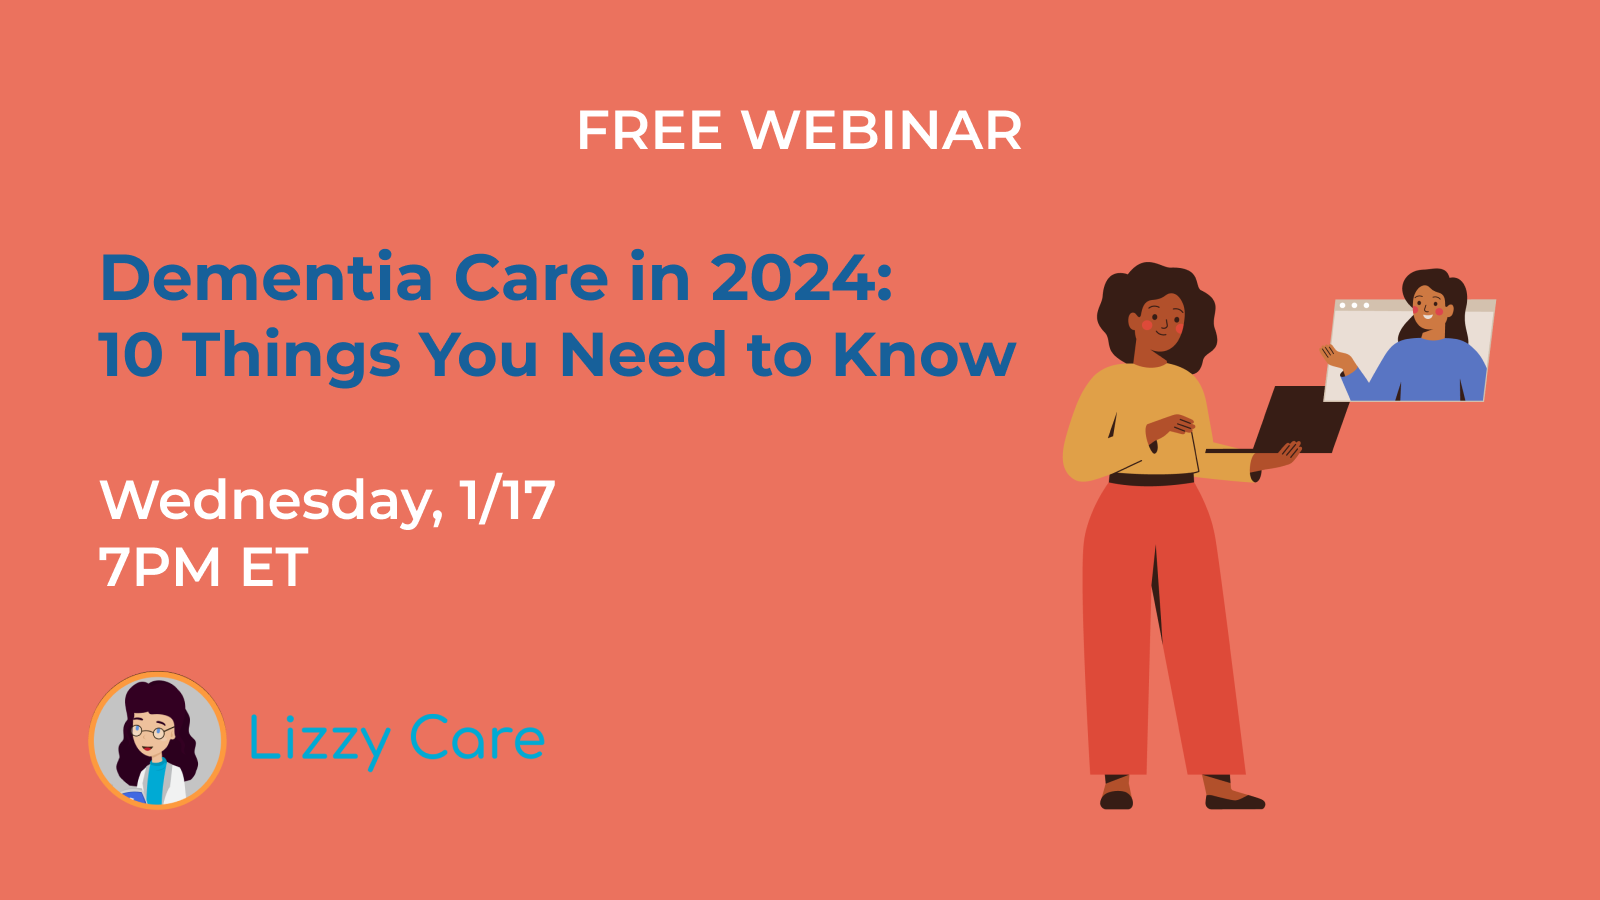 Webinar - Dementia Care in 2024: 10 Things You Need to Know